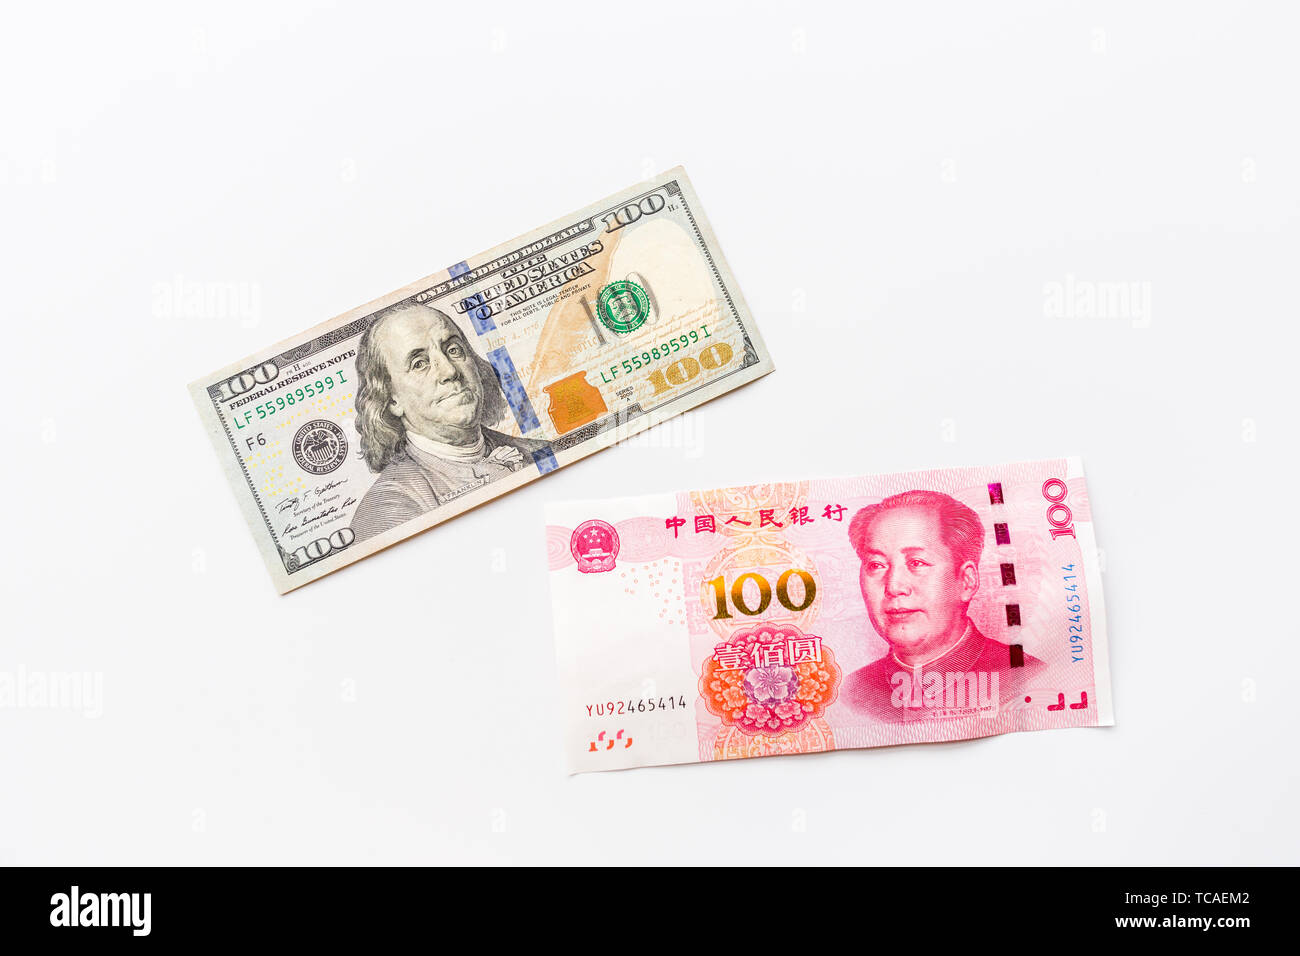 Download Creative Top View Flat Lay Of Chinese And American Cash Money Mockup And Copy Space On White Background In Minimal Style Concept Of Trade War Stock Photo Alamy